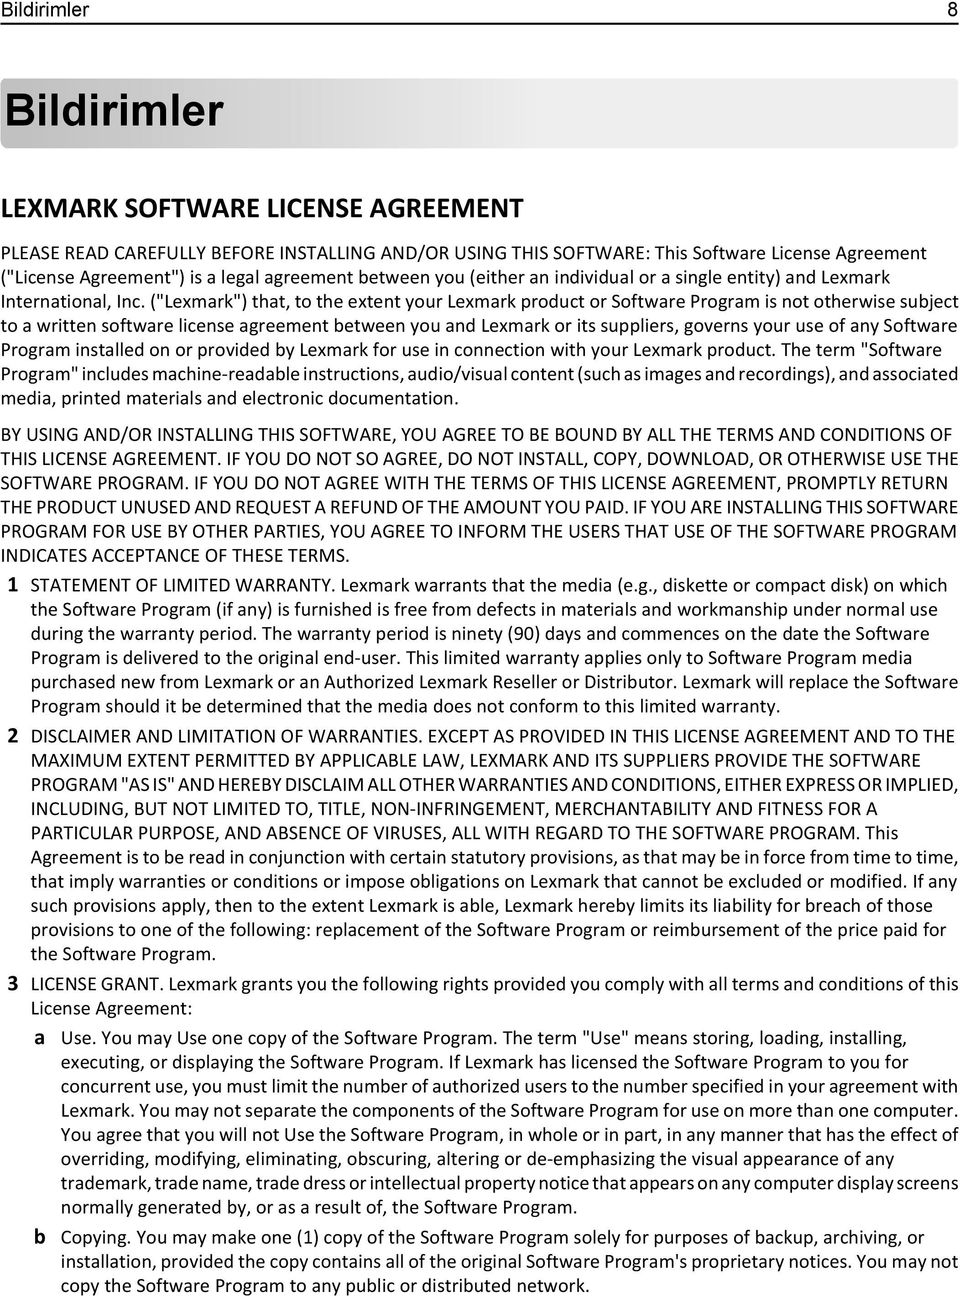 ("Lexmark") that, to the extent your Lexmark product or Software Program is not otherwise subject to a written software license agreement between you and Lexmark or its suppliers, governs your use of